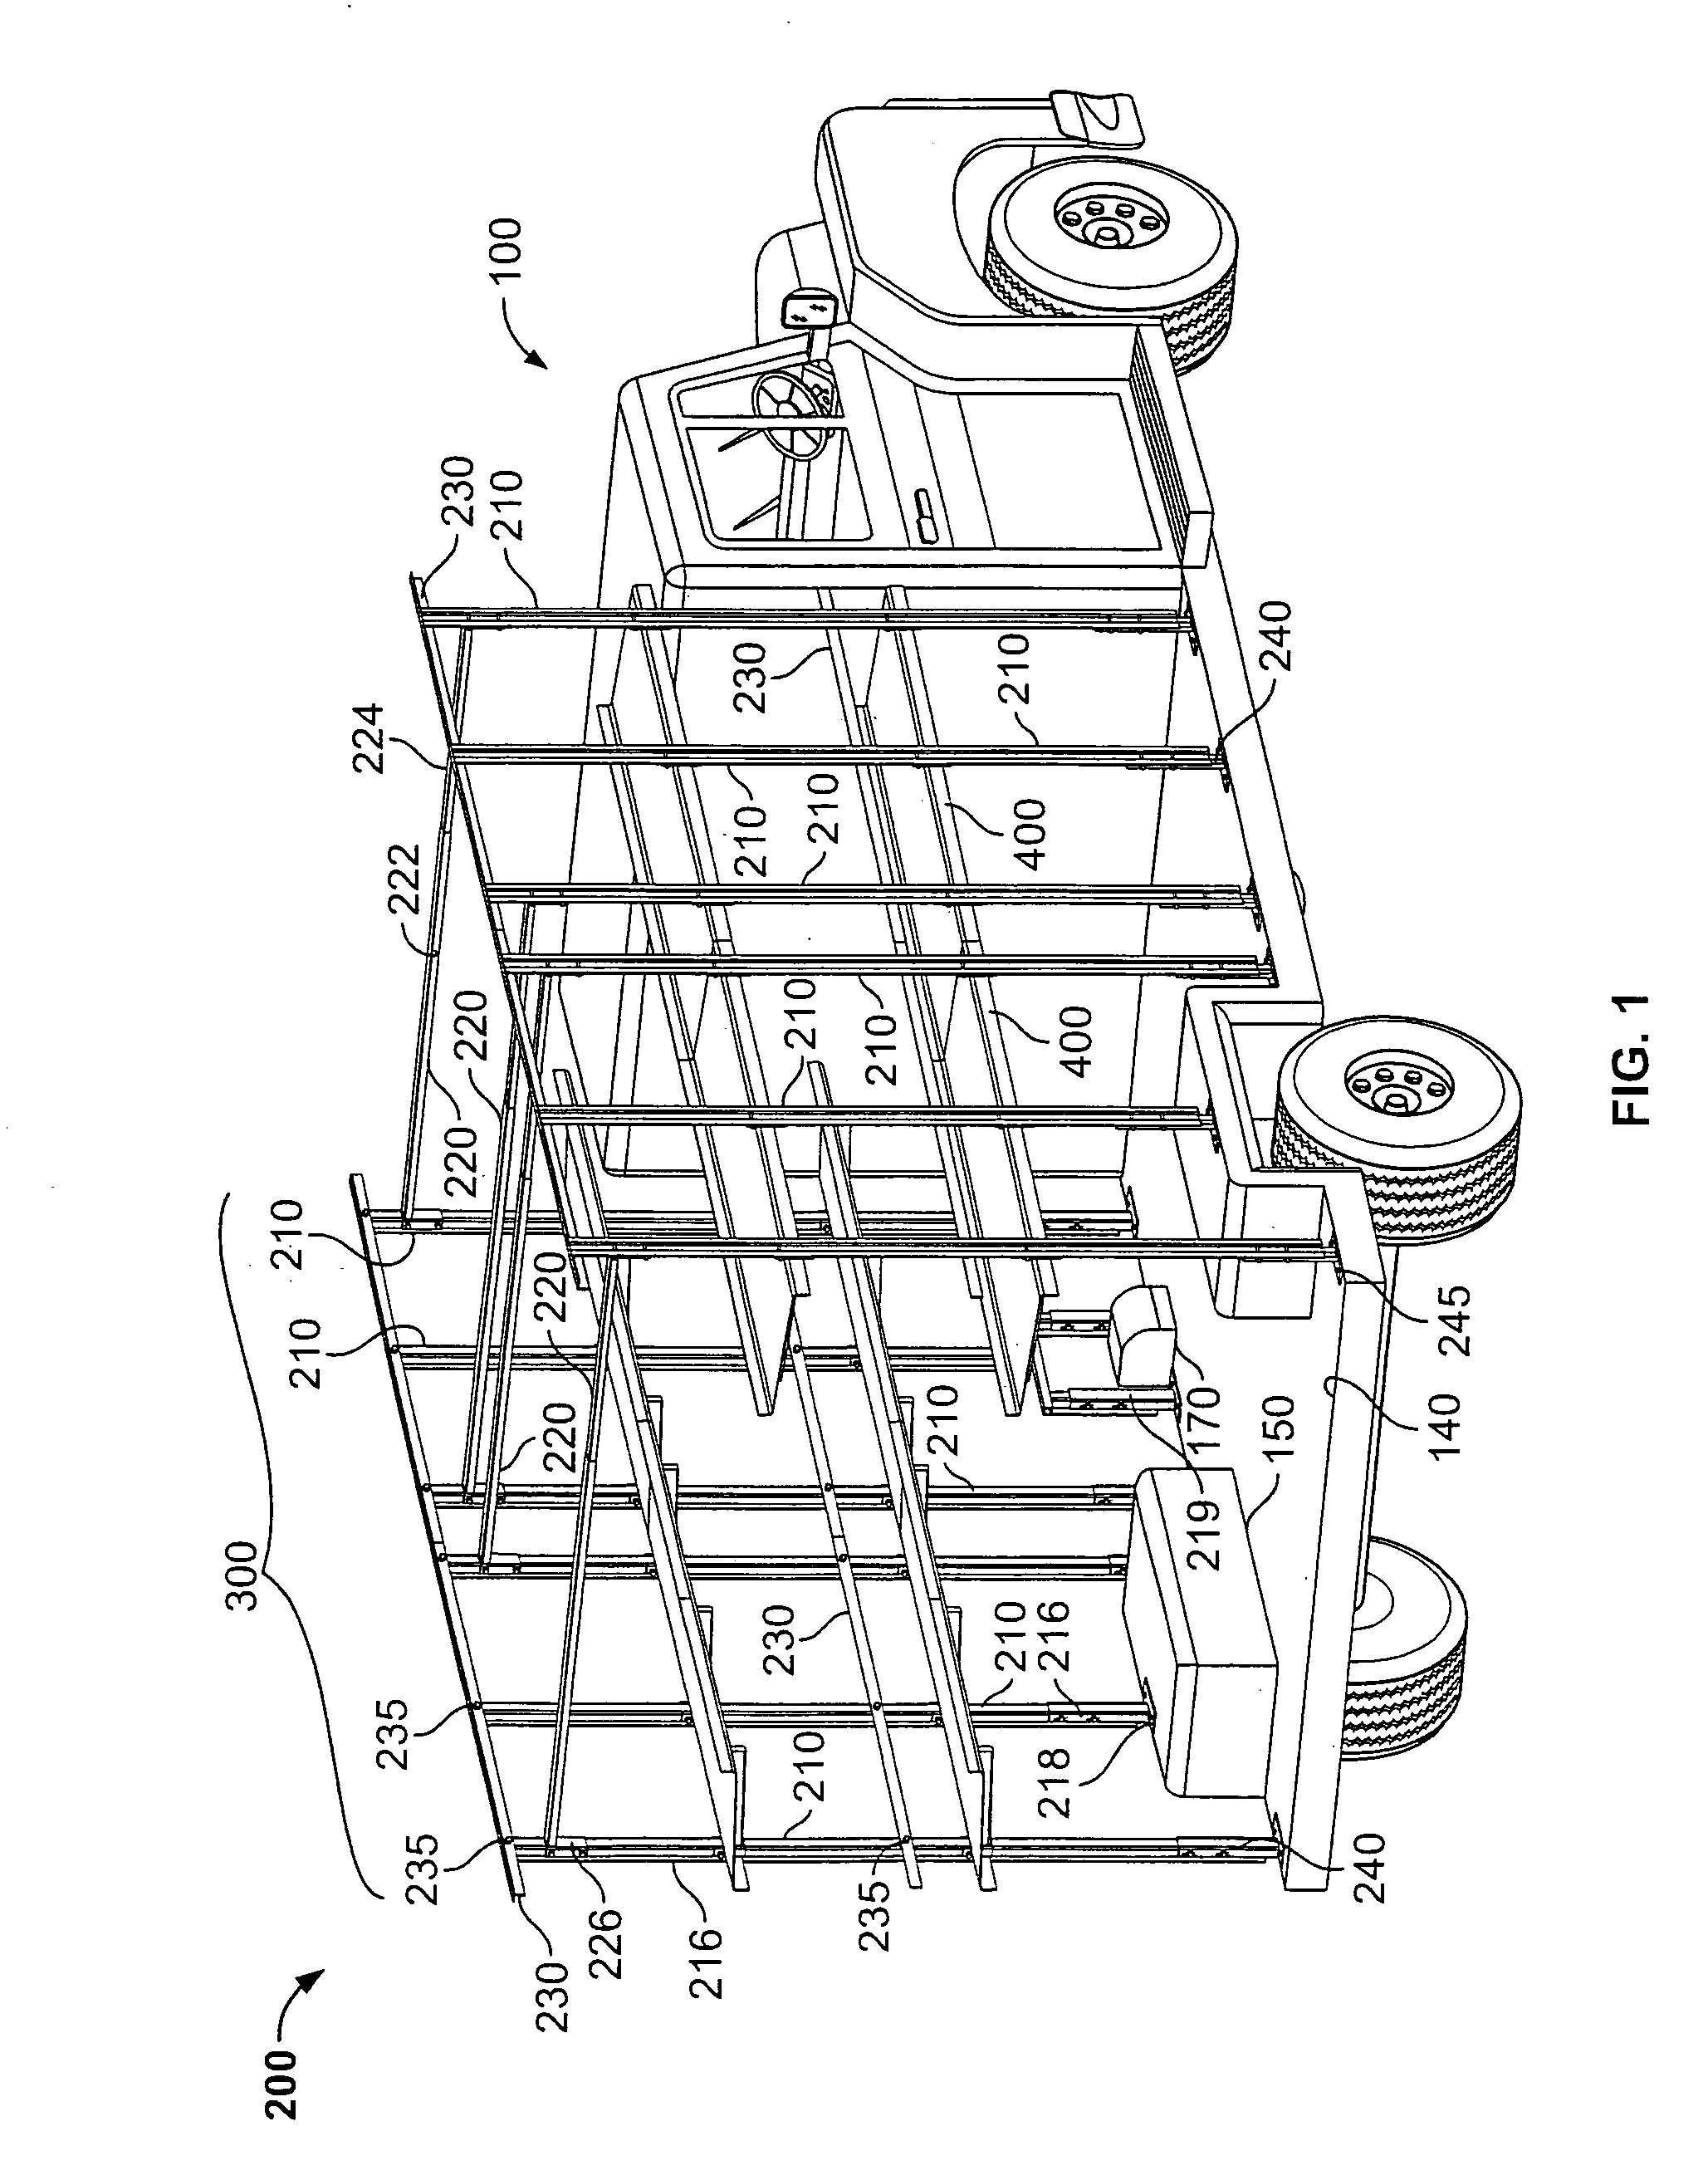 Structurally independent load bearing support system